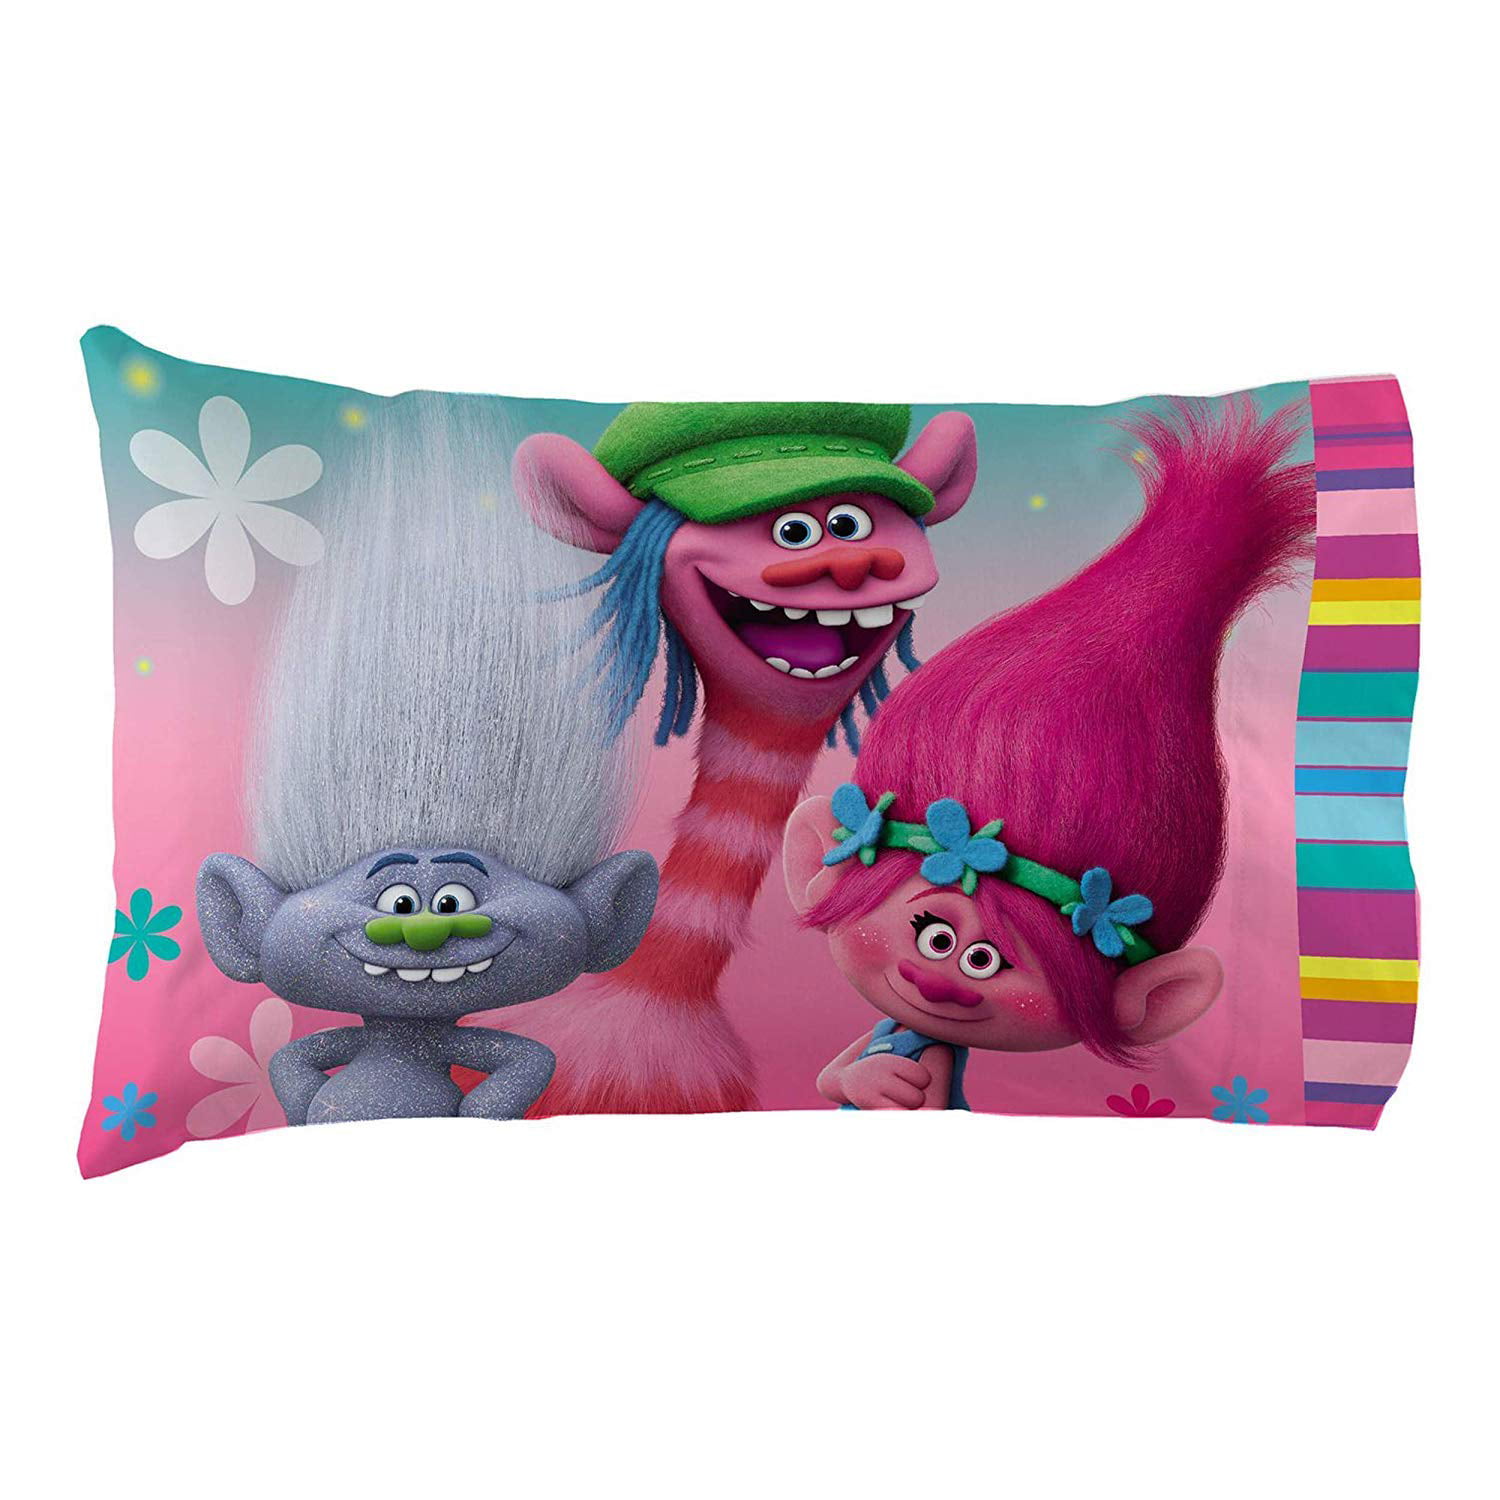 TROLLS MOVIE CHARACTERS Personalized childrens kids CUSHION cover pillow case 